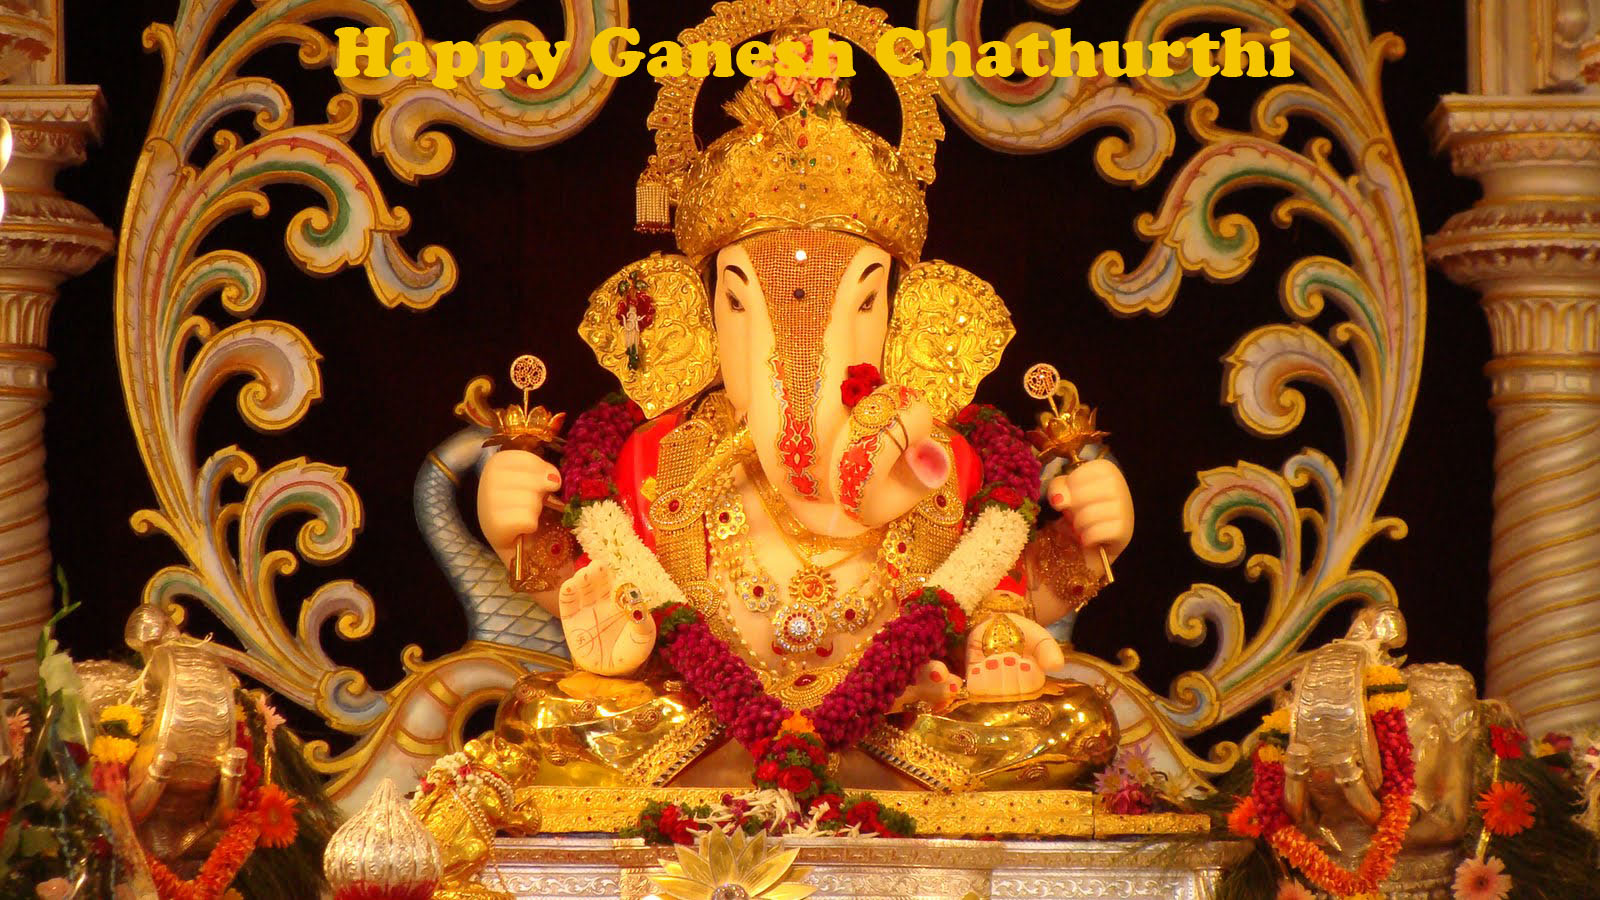 The Pandal Ganapathi – a revolutionary concept in recent times